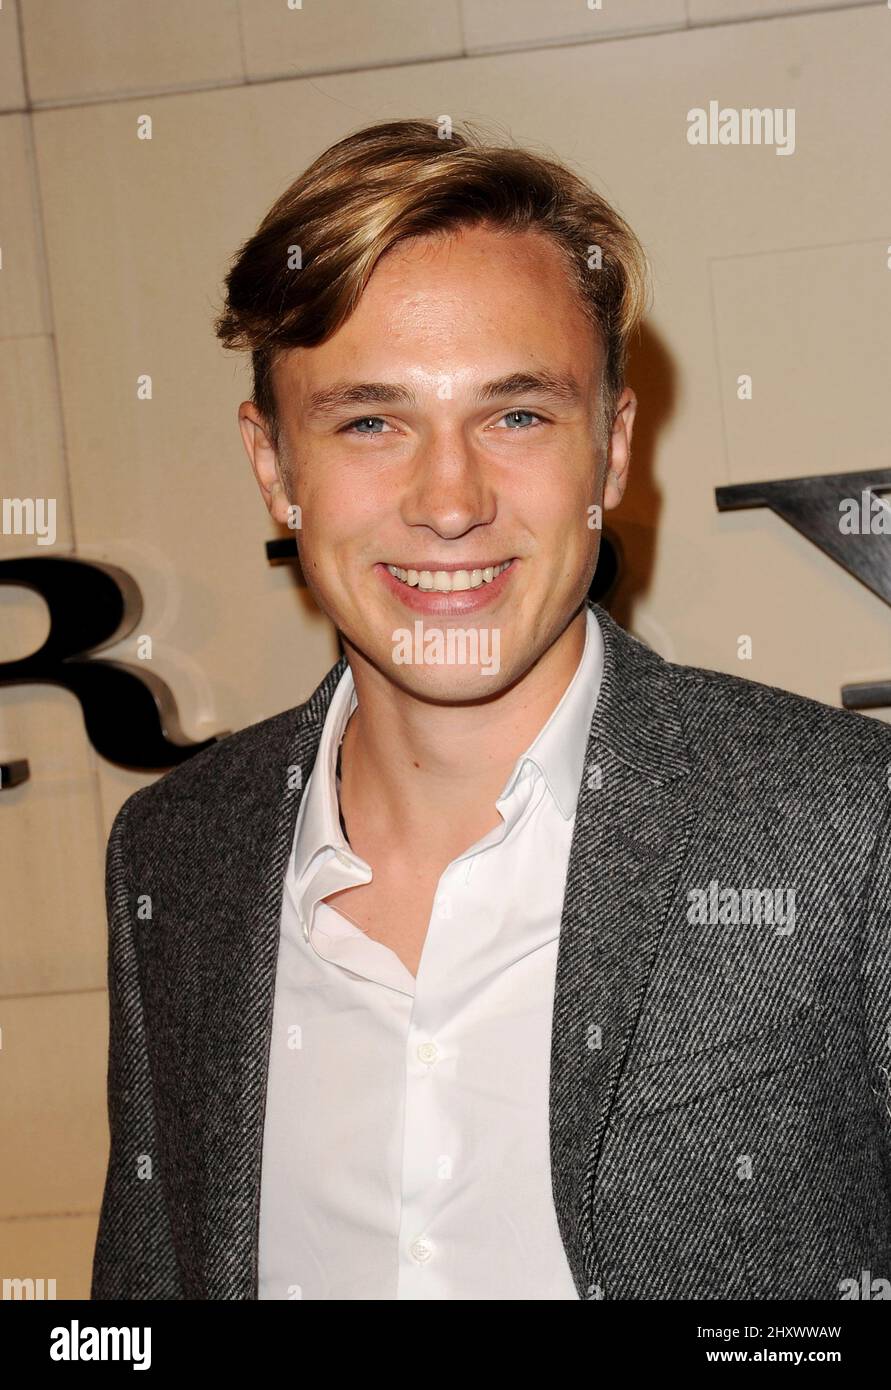 William Moseley during the "Burberry Body" Burberry Fragrance Launch Party  held at Burberry, California Stock Photo - Alamy